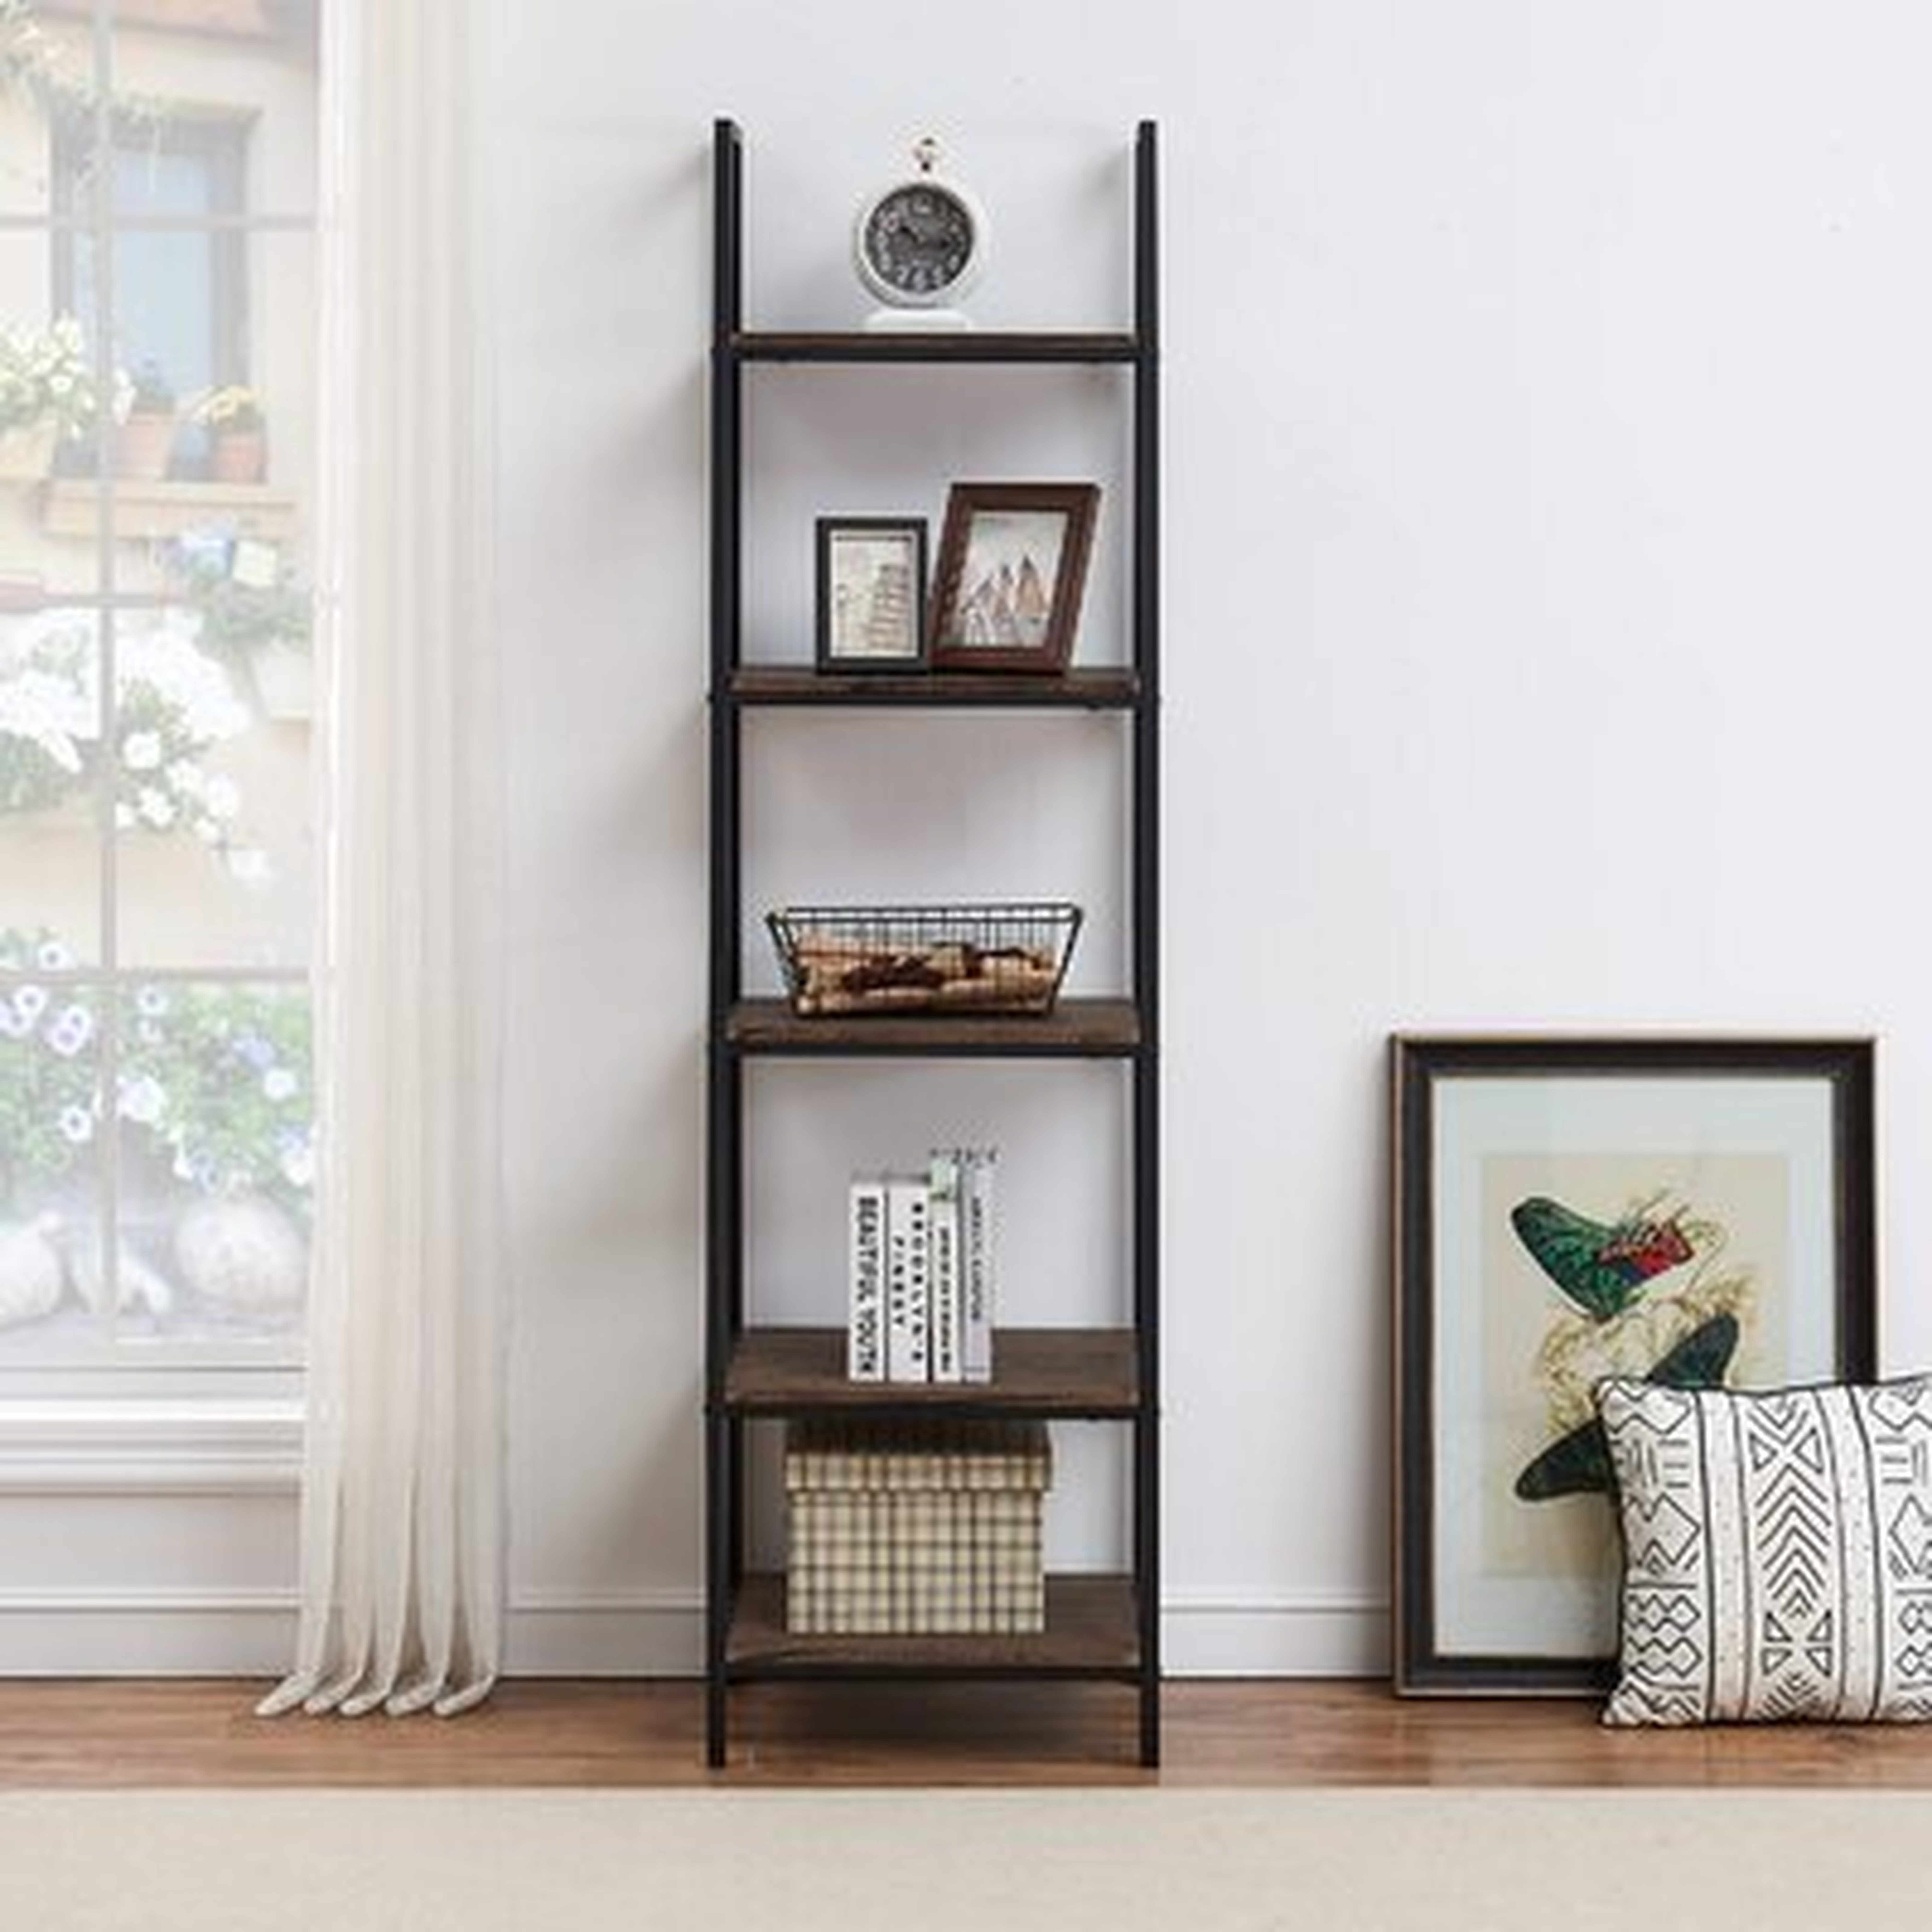 17 Stories 5-shelf Ladder Bookcase, Leaning Bookcases And Book Shelves, Industrial Rustic Bookshelf, Home Office Etagere Bookcase-height: 72"h - Wayfair